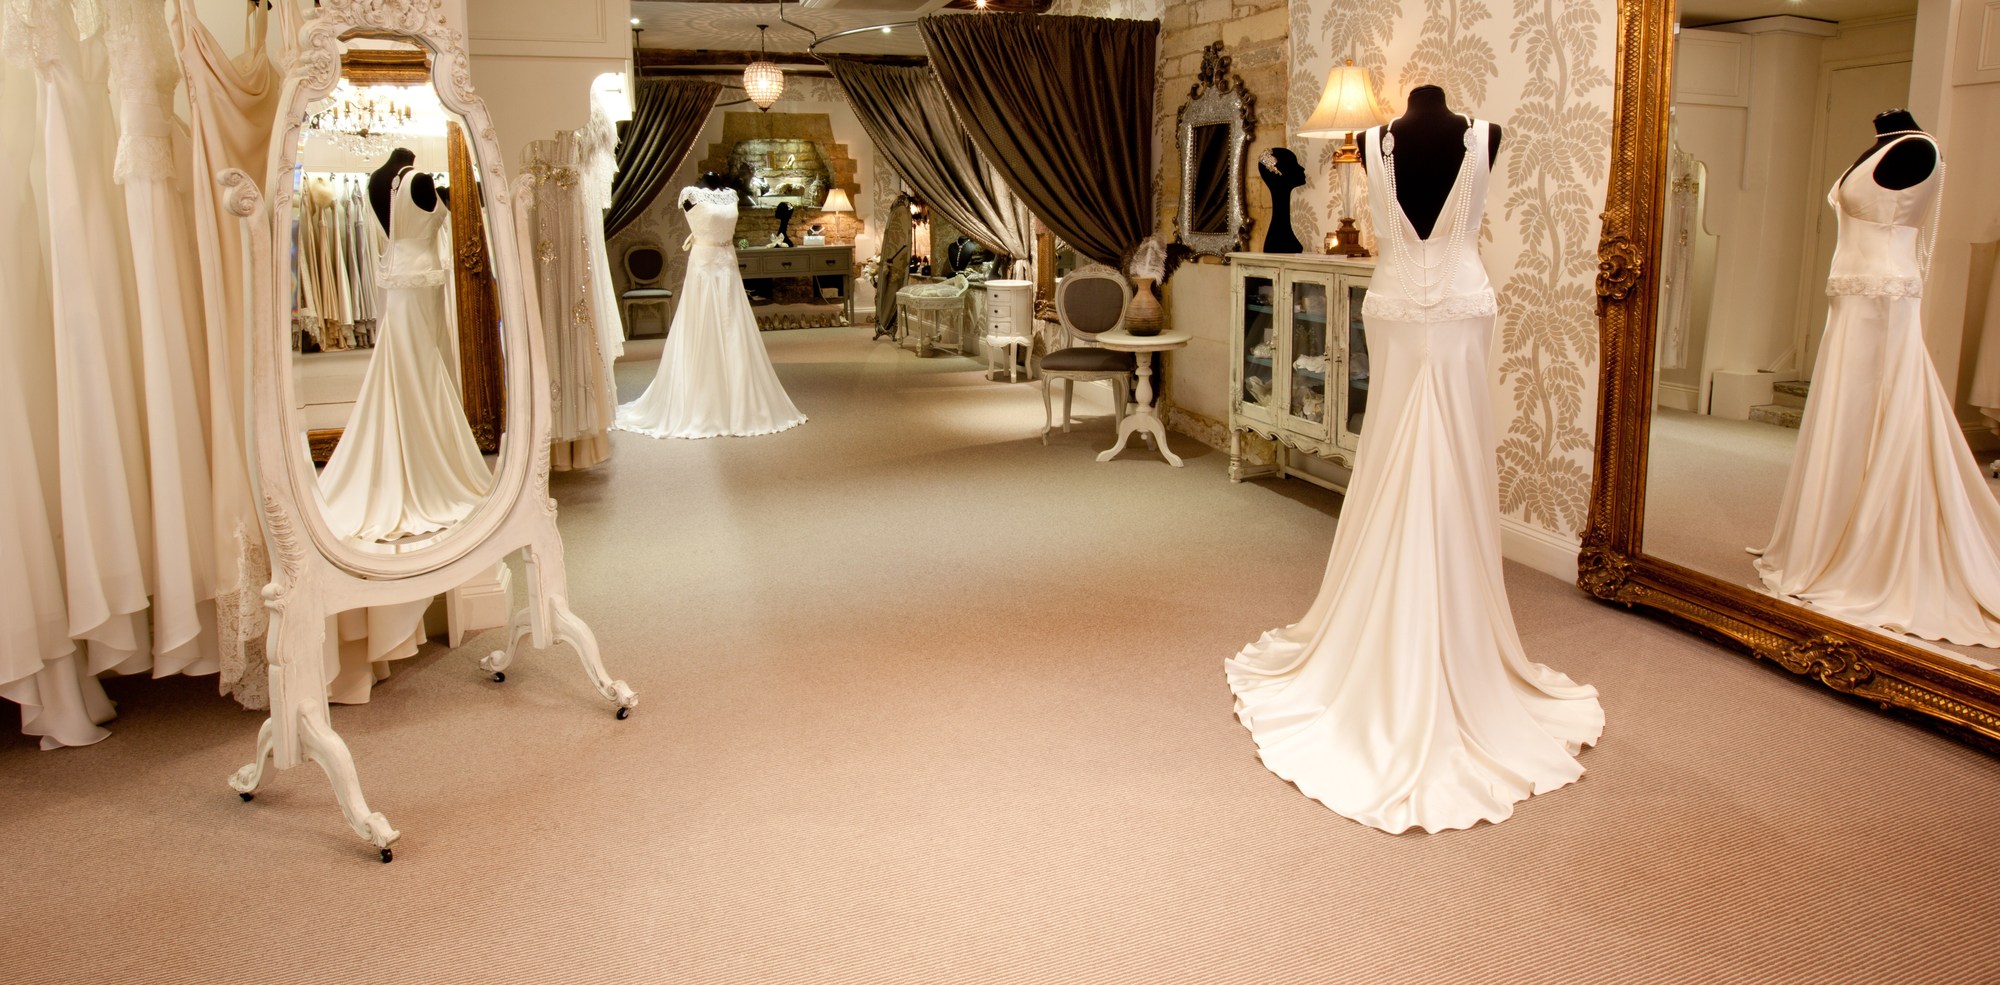 Carina Baverstock Couture, Wedding Dresses and Bridal Gowns In Bradford on  Avon, Wiltshire.